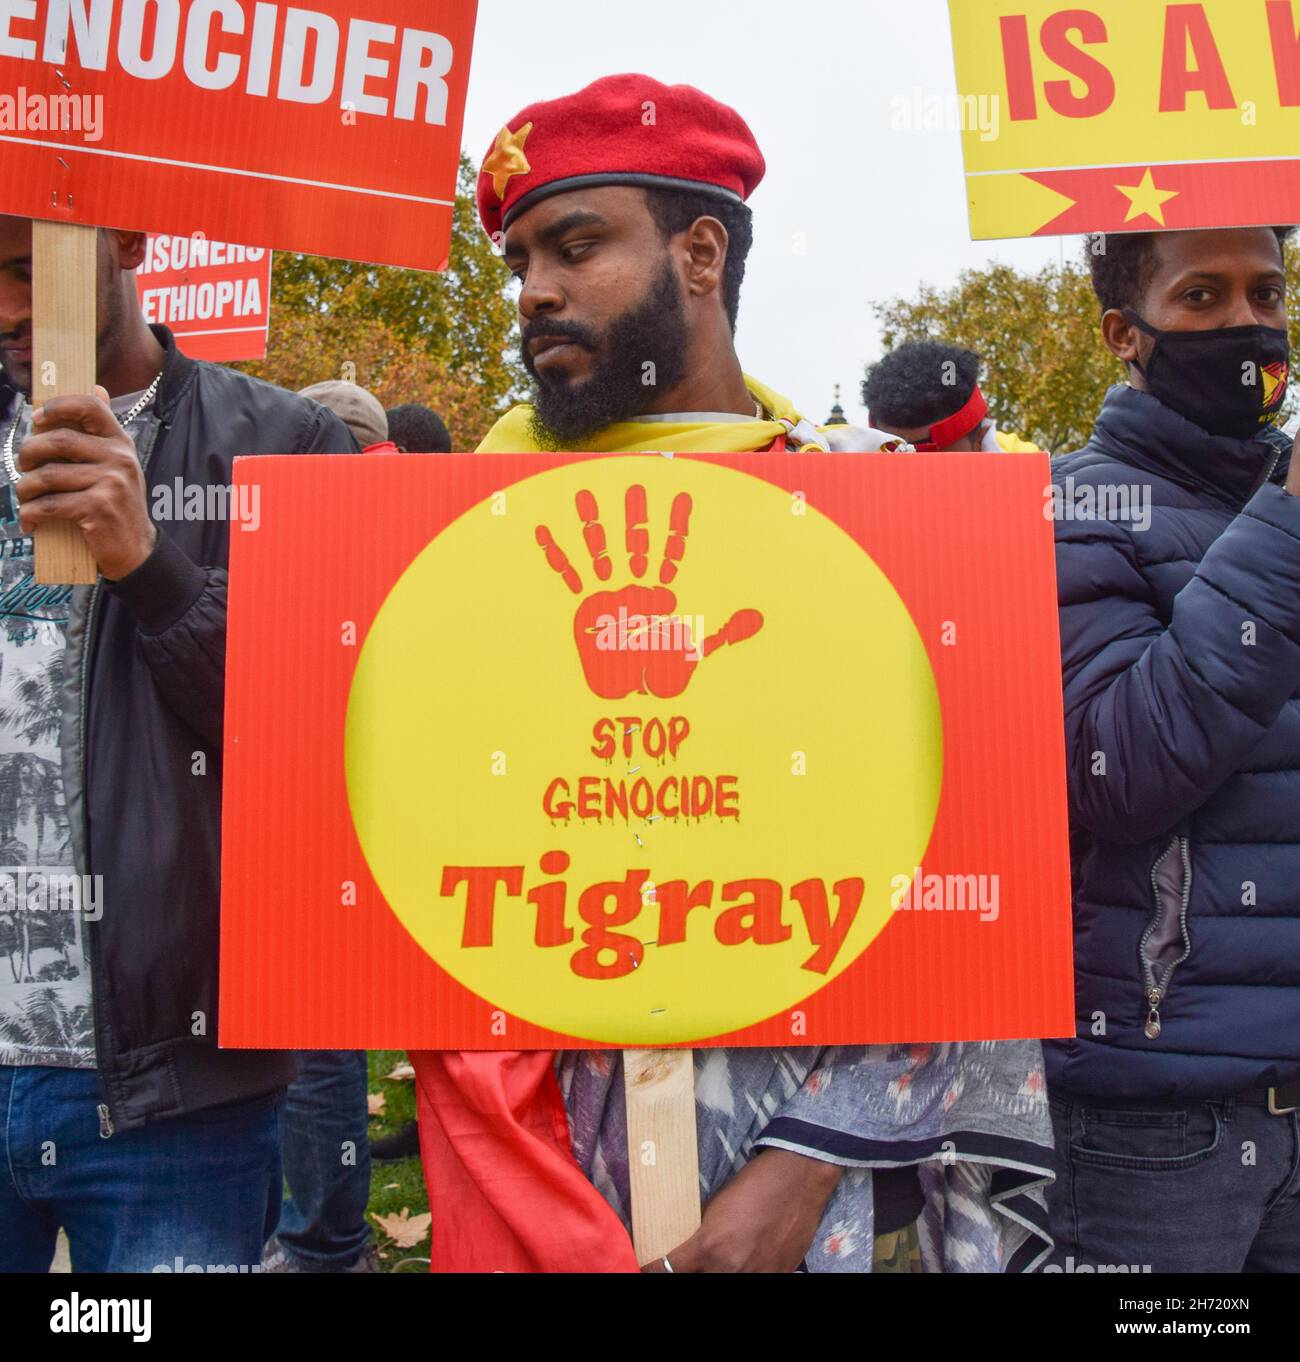 London, UK. 19th November 2021. Demonstrators gathered at Parliament Square in protest against mass arrests of Tigrayans in Ethiopia and what they call "genocidal war" by Ethiopia and Eritrea on the region of Tigray. Stock Photo